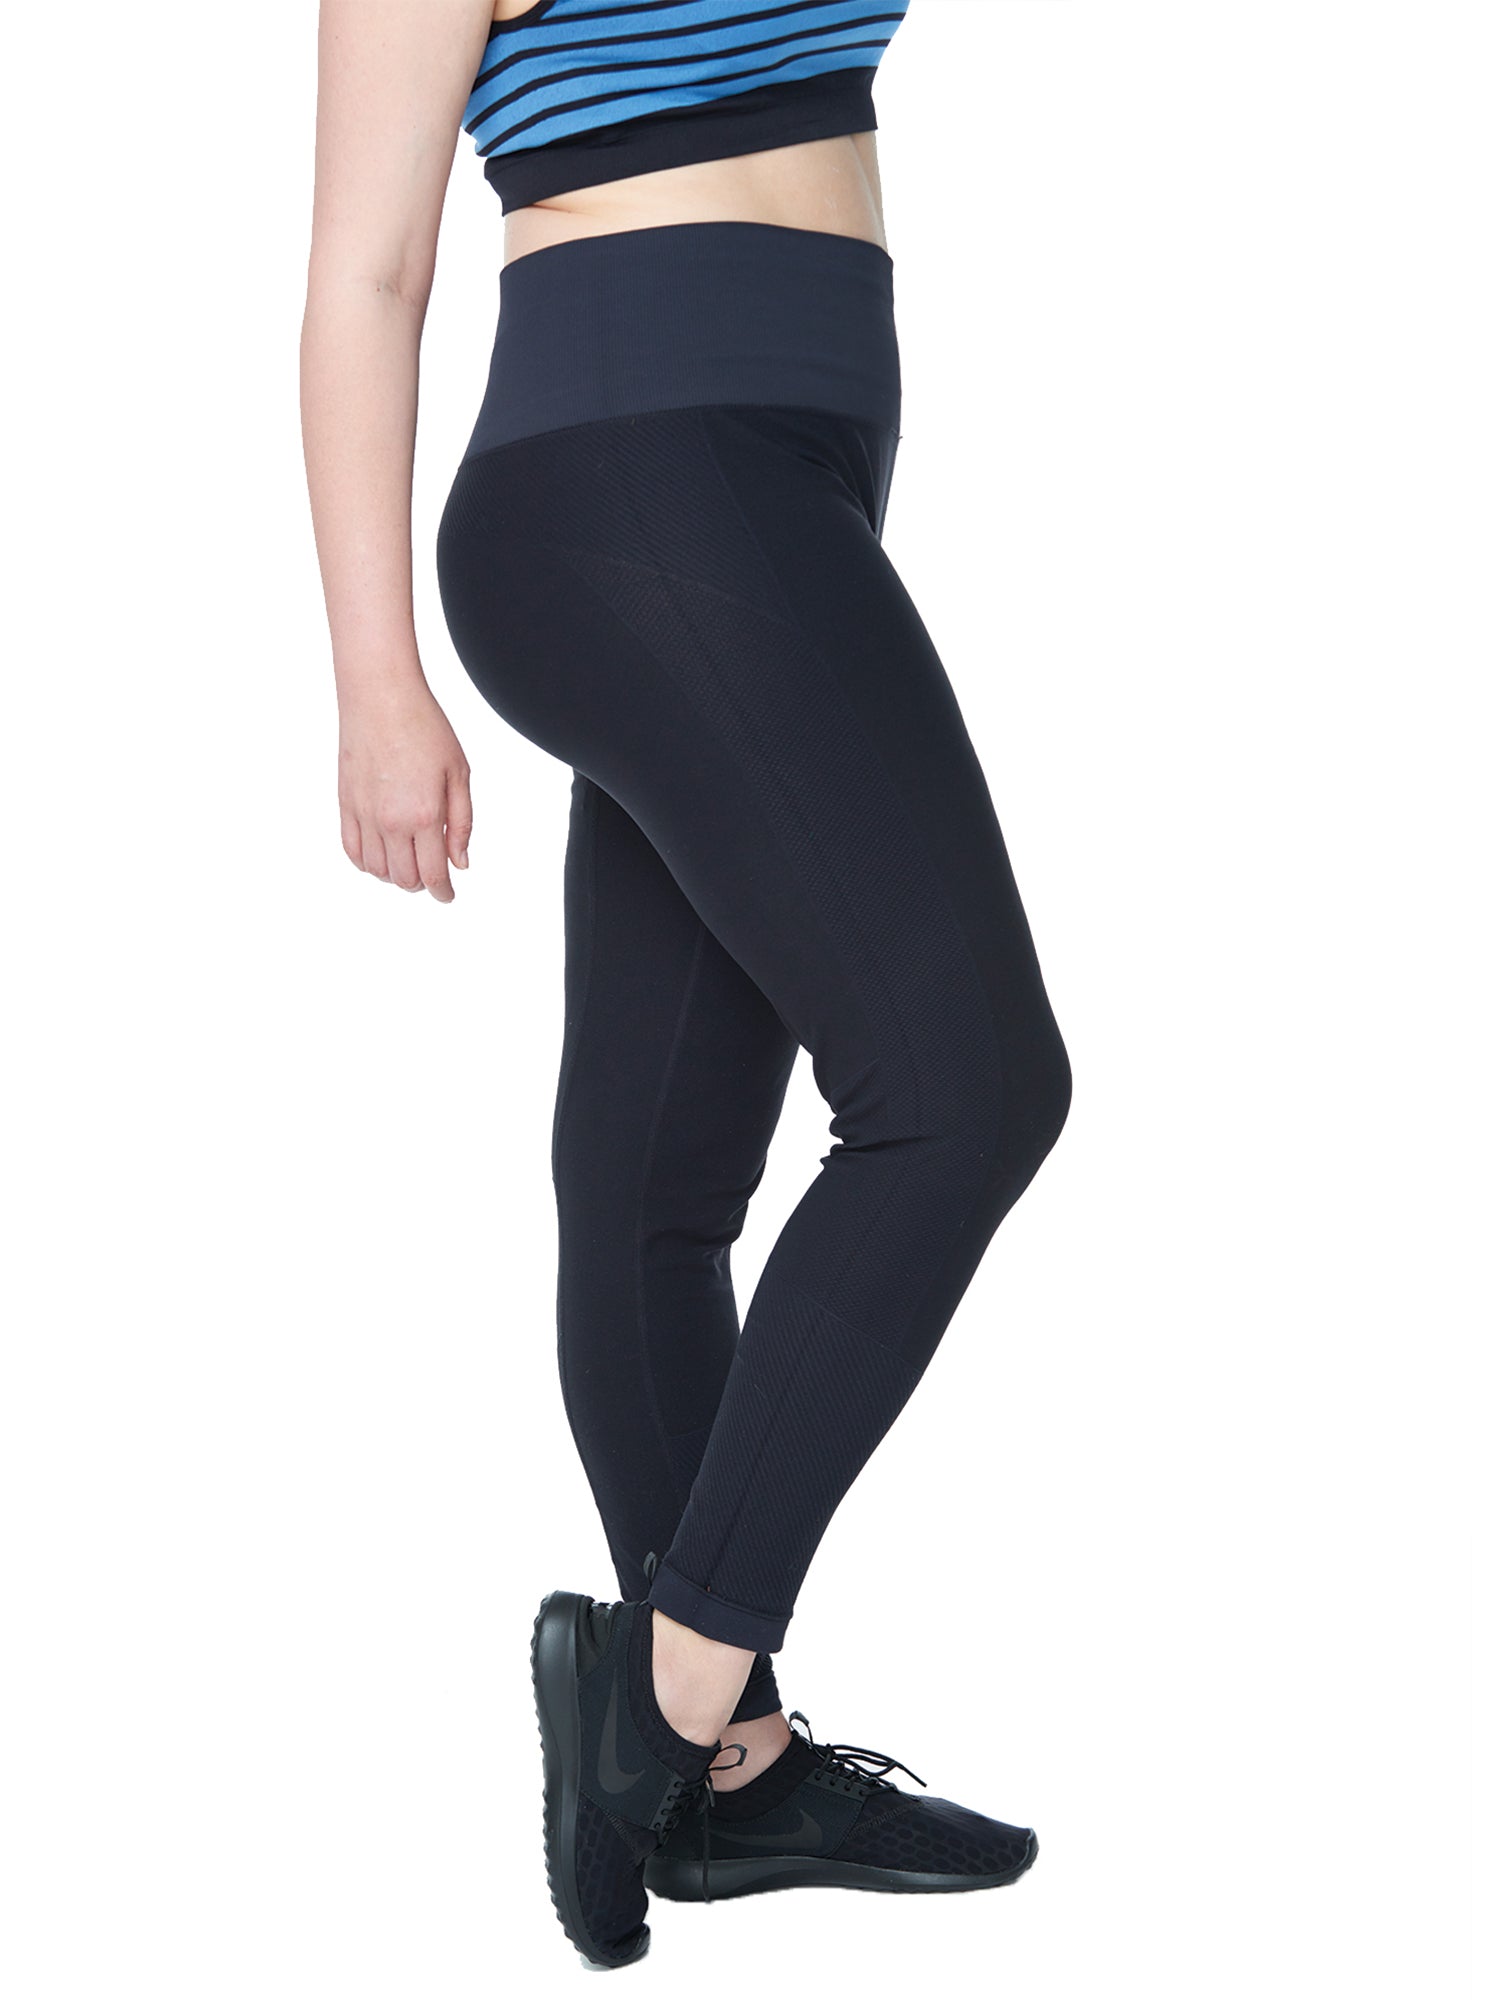 Knosfe High Waisted Leggings Tummy Control Thermal Fleece Lined